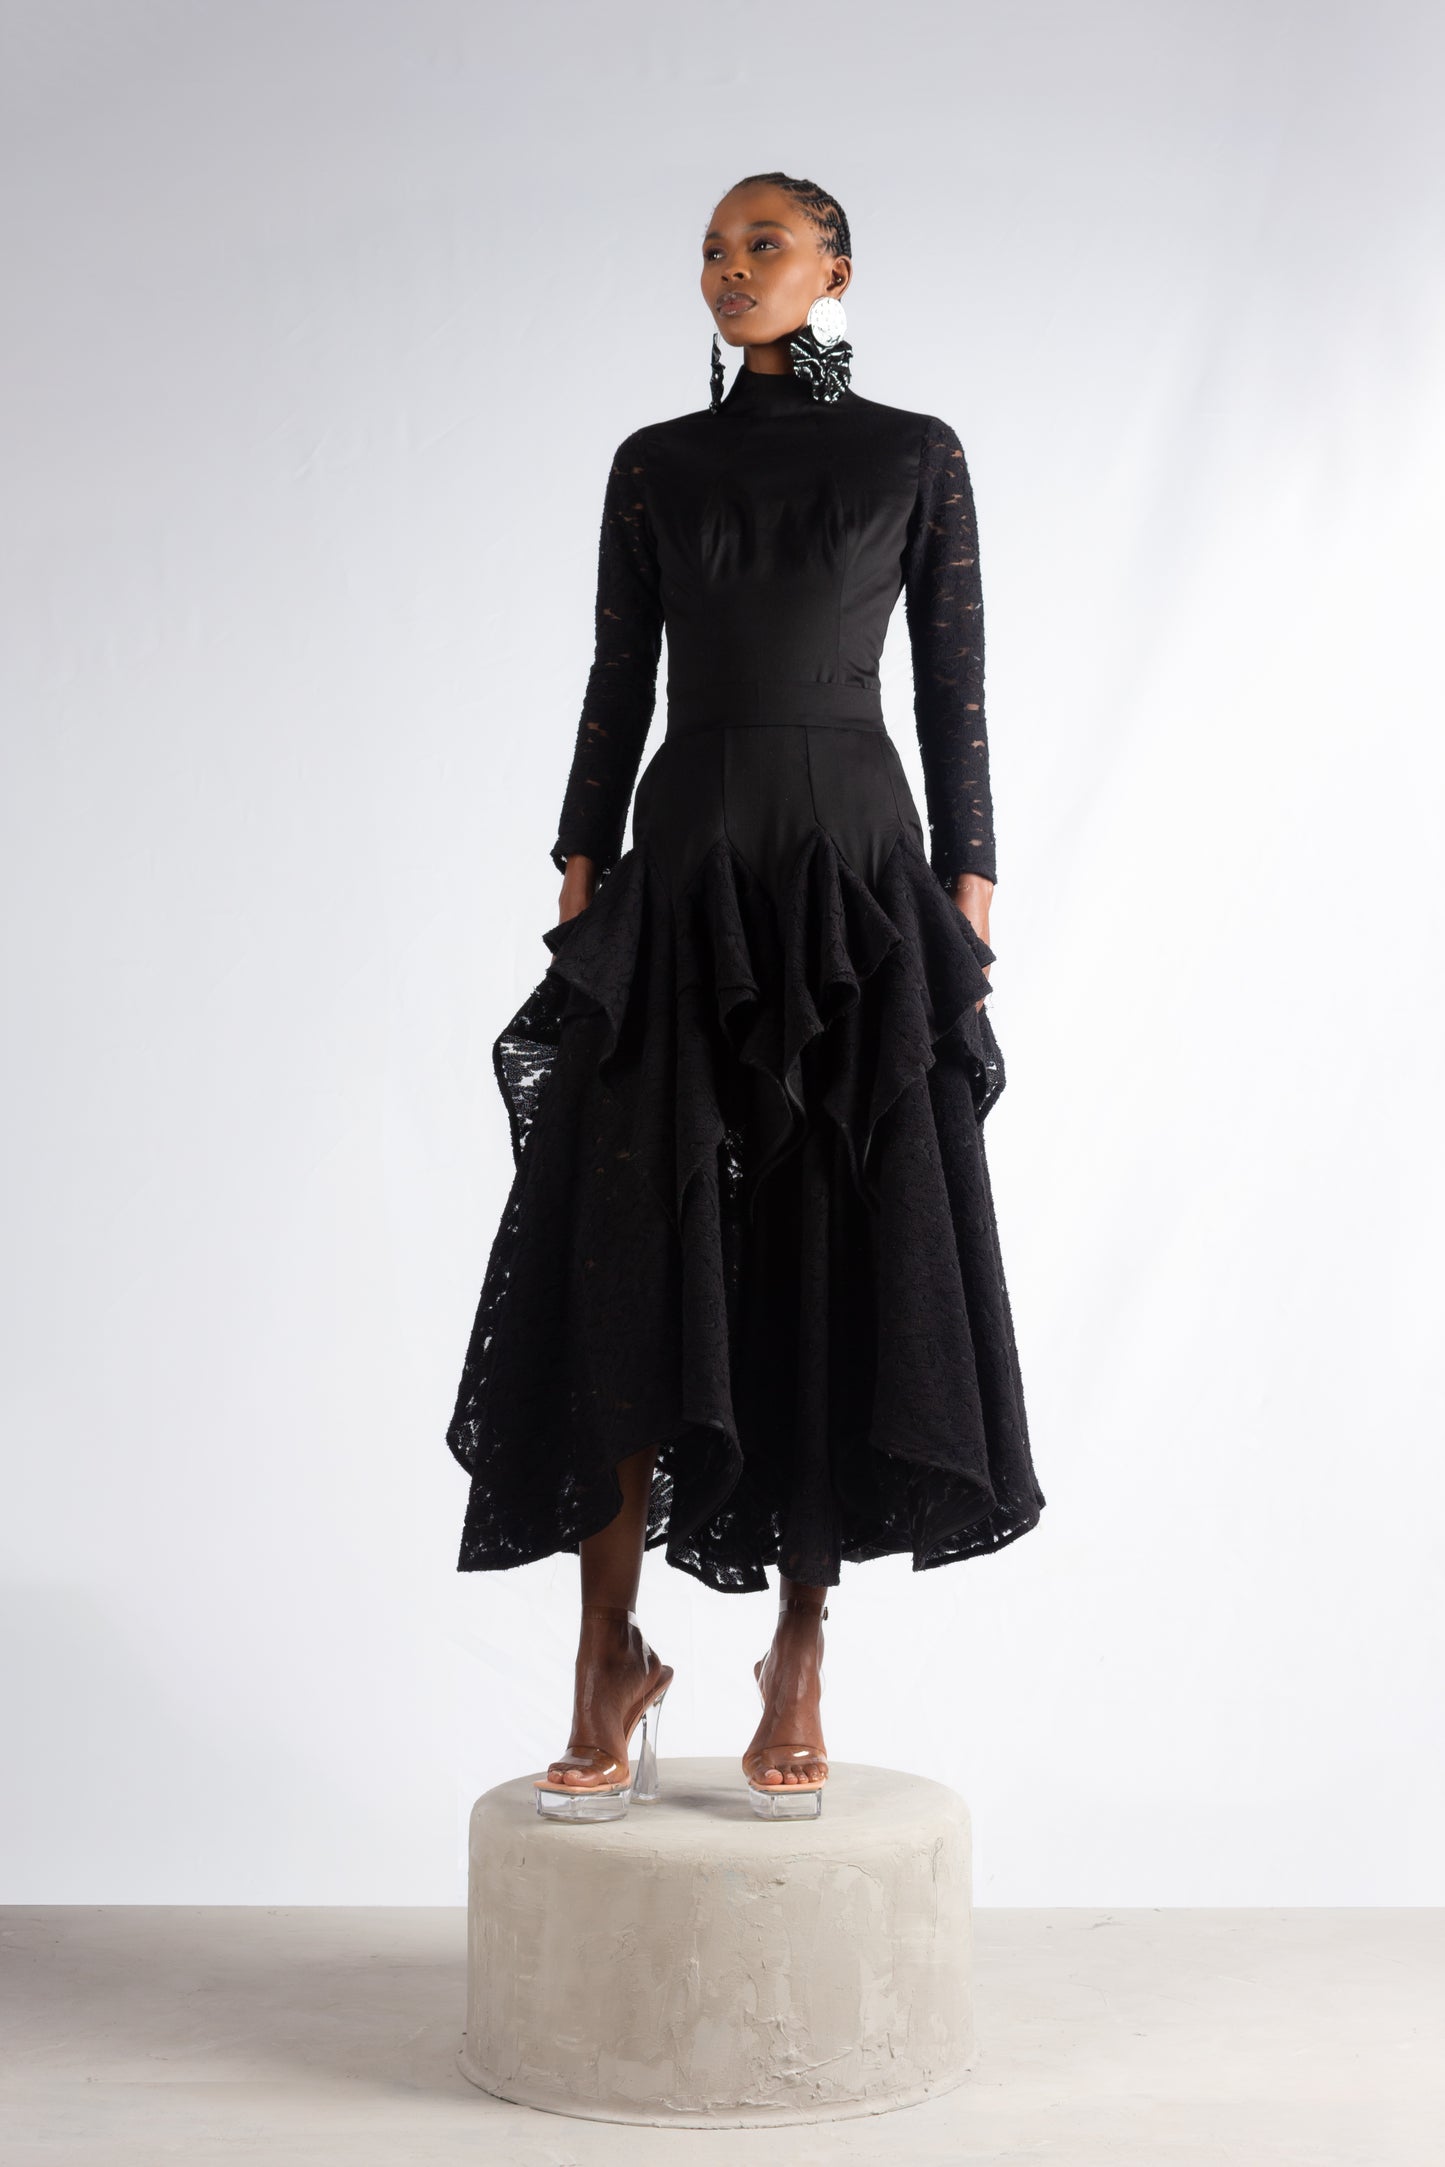 The Diffusion Skirt